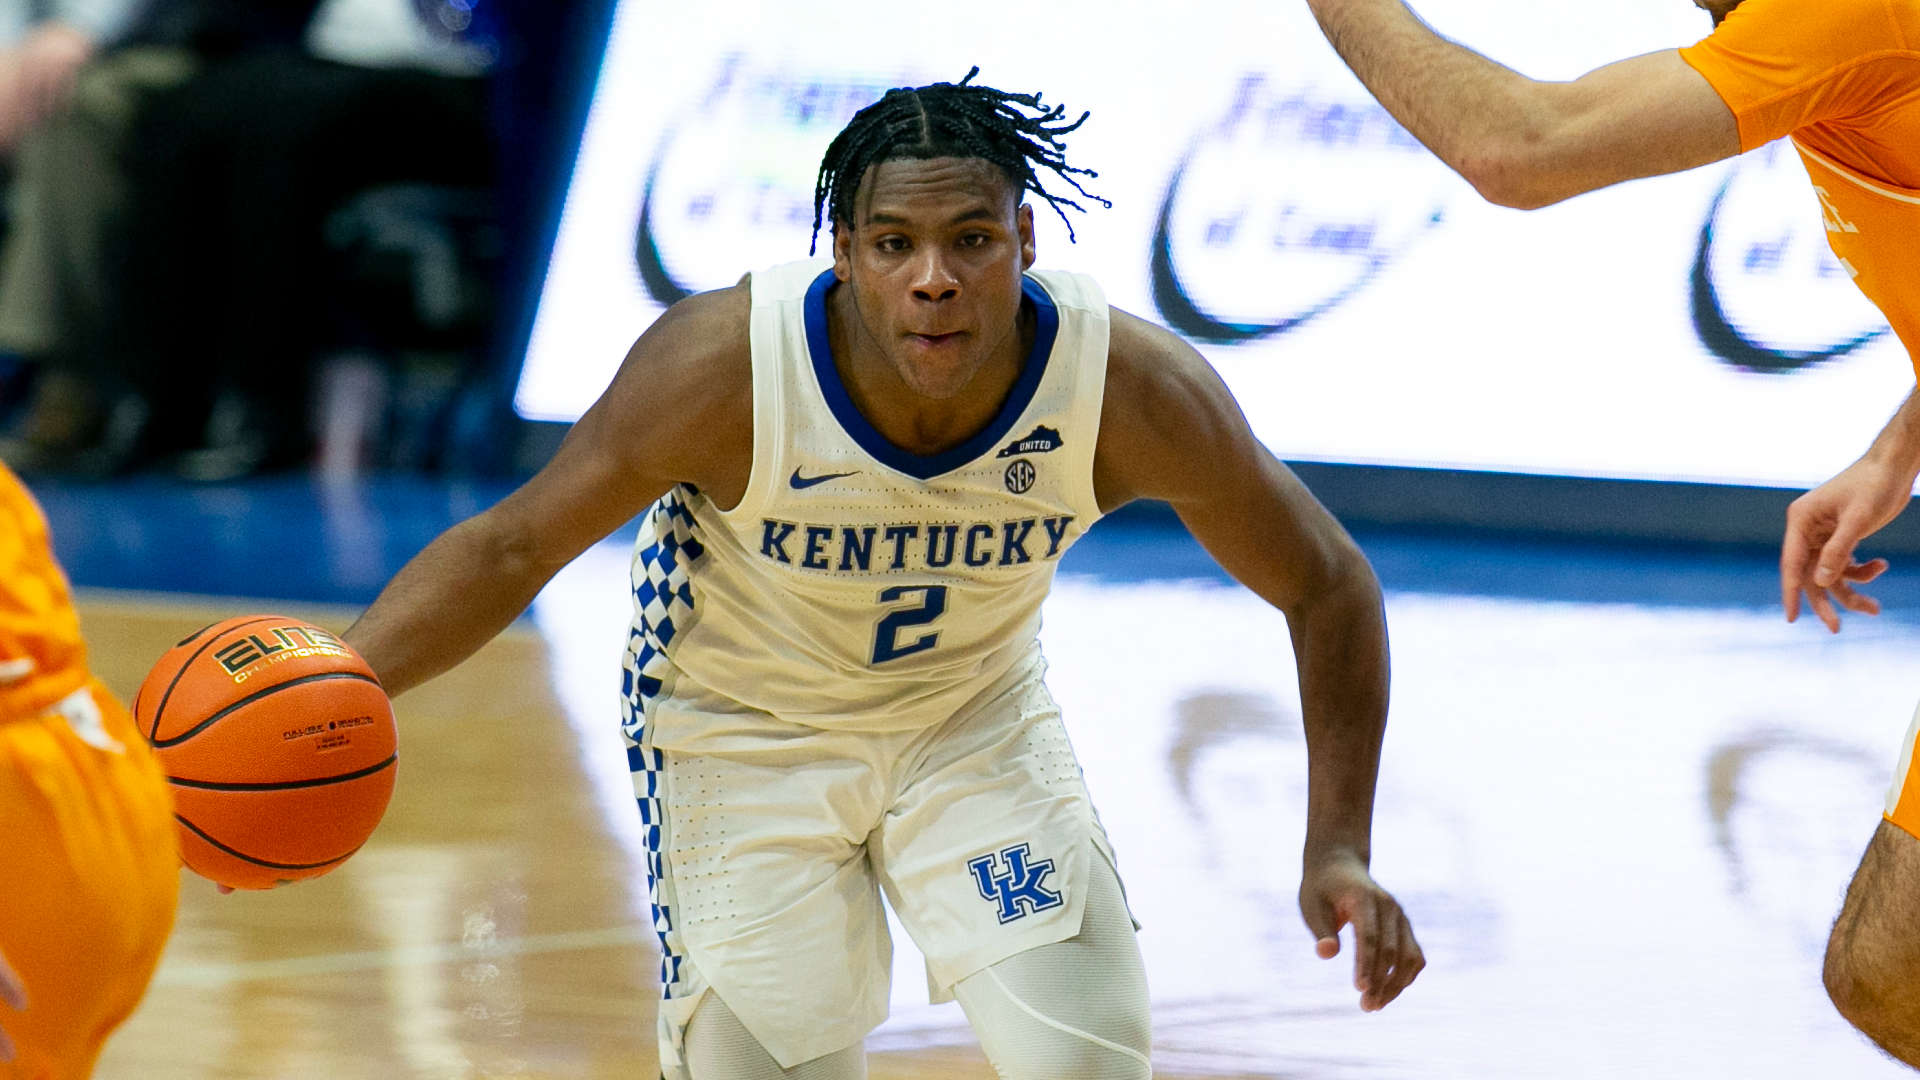 Men's Basketball Blue-White Game Set for Saturday in Pikeville